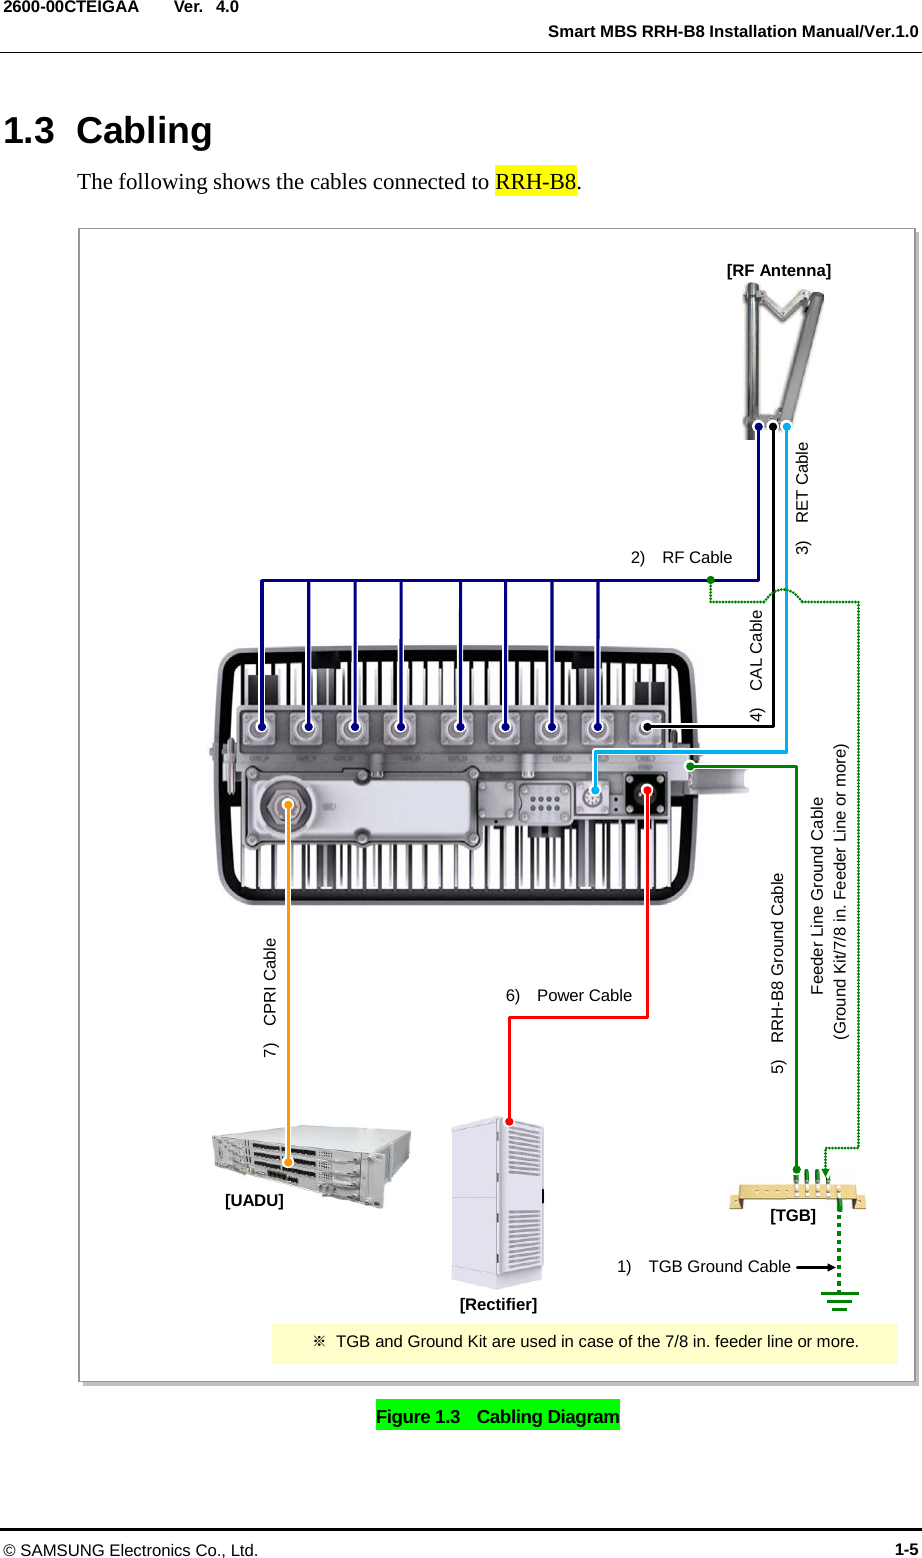  Ver.   Smart MBS RRH-B8 Installation Manual/Ver.1.0 2600-00CTEIGAA 4.0 1.3 Cabling The following shows the cables connected to RRH-B8.  Figure 1.3    Cabling Diagram  [RF Antenna] 1)  TGB Ground Cable [TGB] Feeder Line Ground Cable  (Ground Kit/7/8 in. Feeder Line or more) ※ TGB and Ground Kit are used in case of the 7/8 in. feeder line or more. [Rectifier] [UADU] 7)  CPRI Cable 2)  RF Cable 4)  CAL Cable 3)  RET Cable 6)    Power Cable 5)  RRH-B8 Ground Cable © SAMSUNG Electronics Co., Ltd. 1-5 